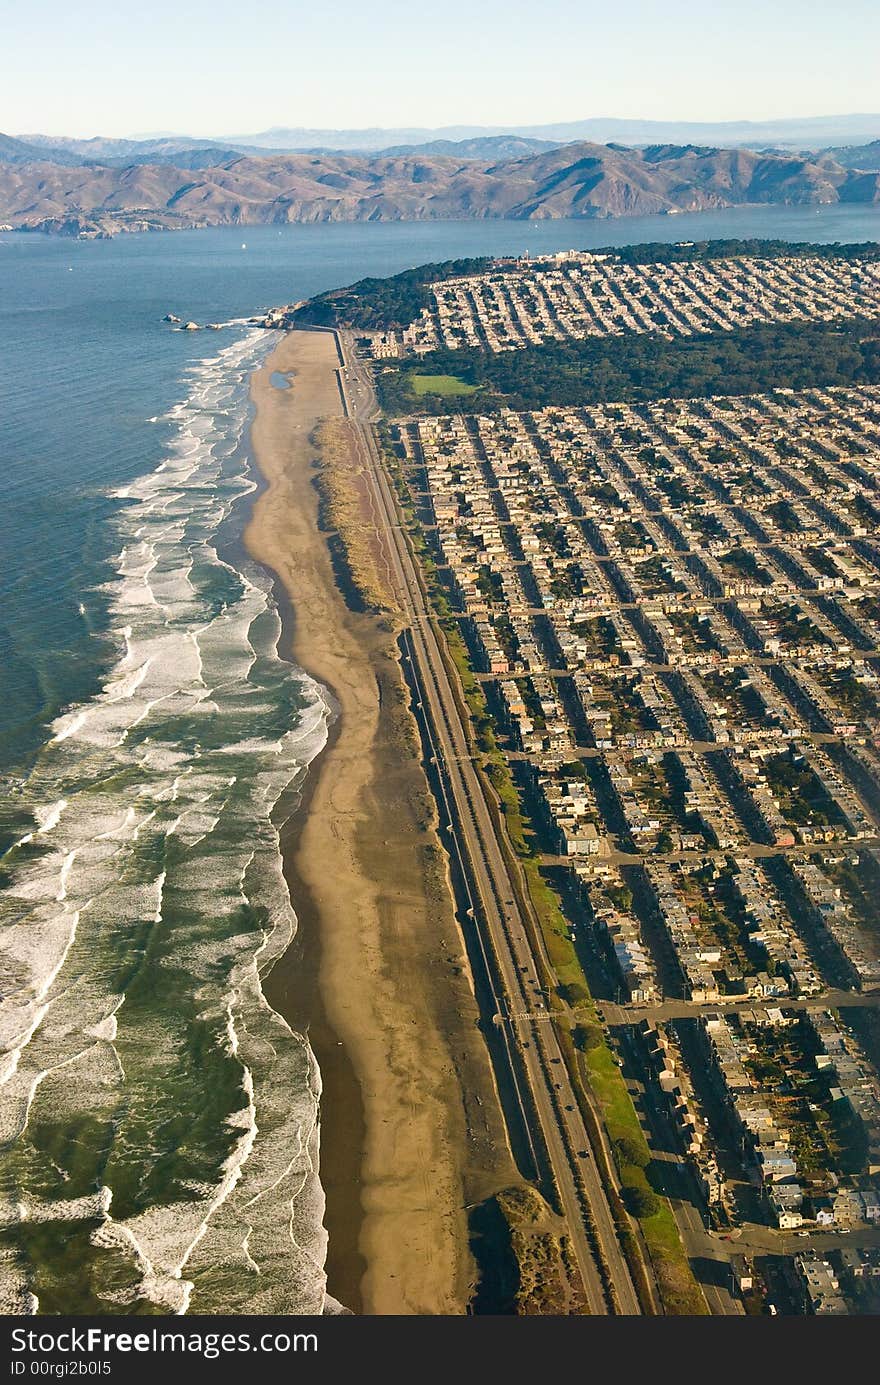 This is ocean beach in San Francisco and Hwy 1. Also seen is parts of Golden Gate park. This photograph was taken from a cessna plane at 2000 feet. This is ocean beach in San Francisco and Hwy 1. Also seen is parts of Golden Gate park. This photograph was taken from a cessna plane at 2000 feet.